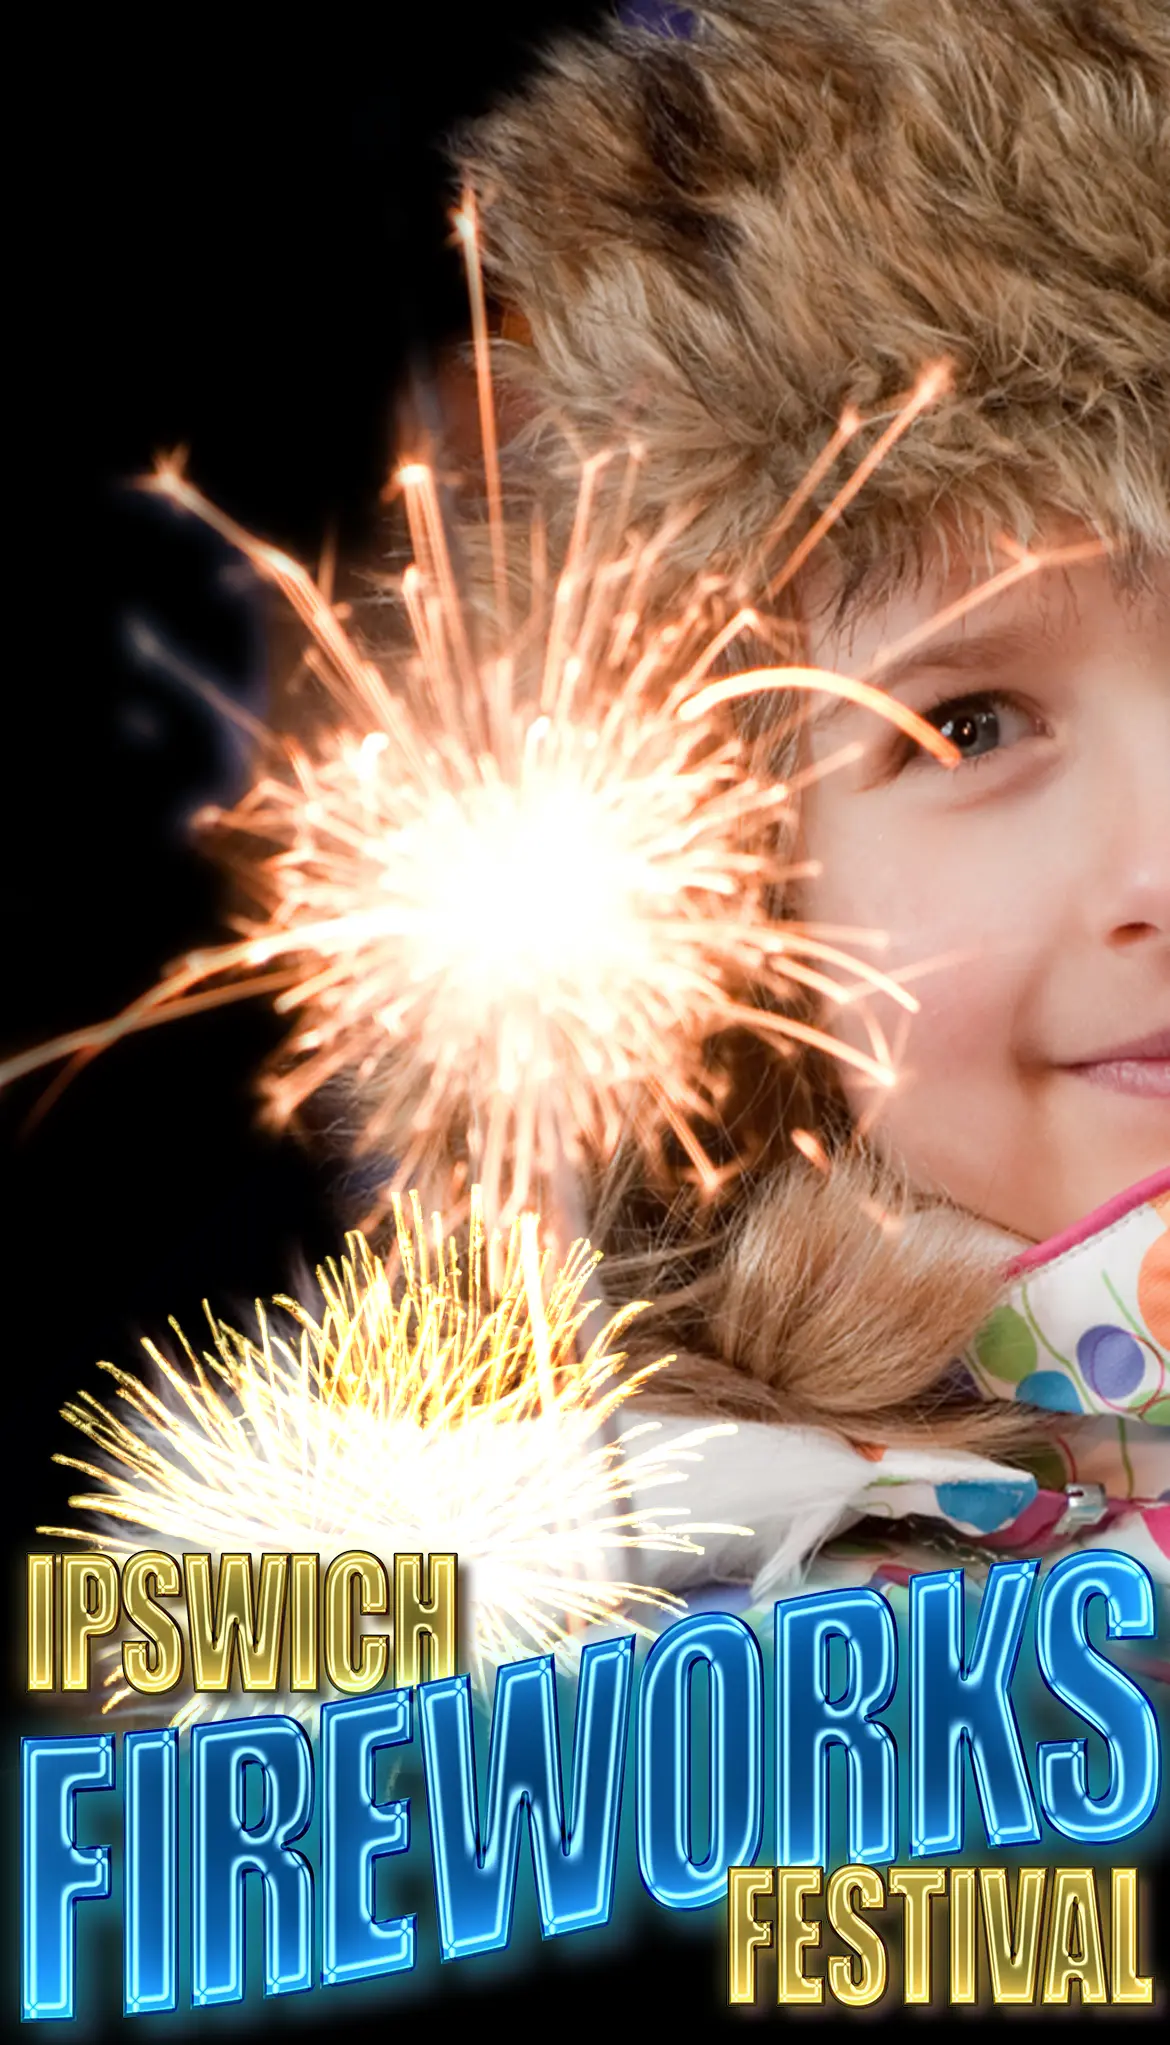 Image of child holding a sparkler at Ipswich Fireworks